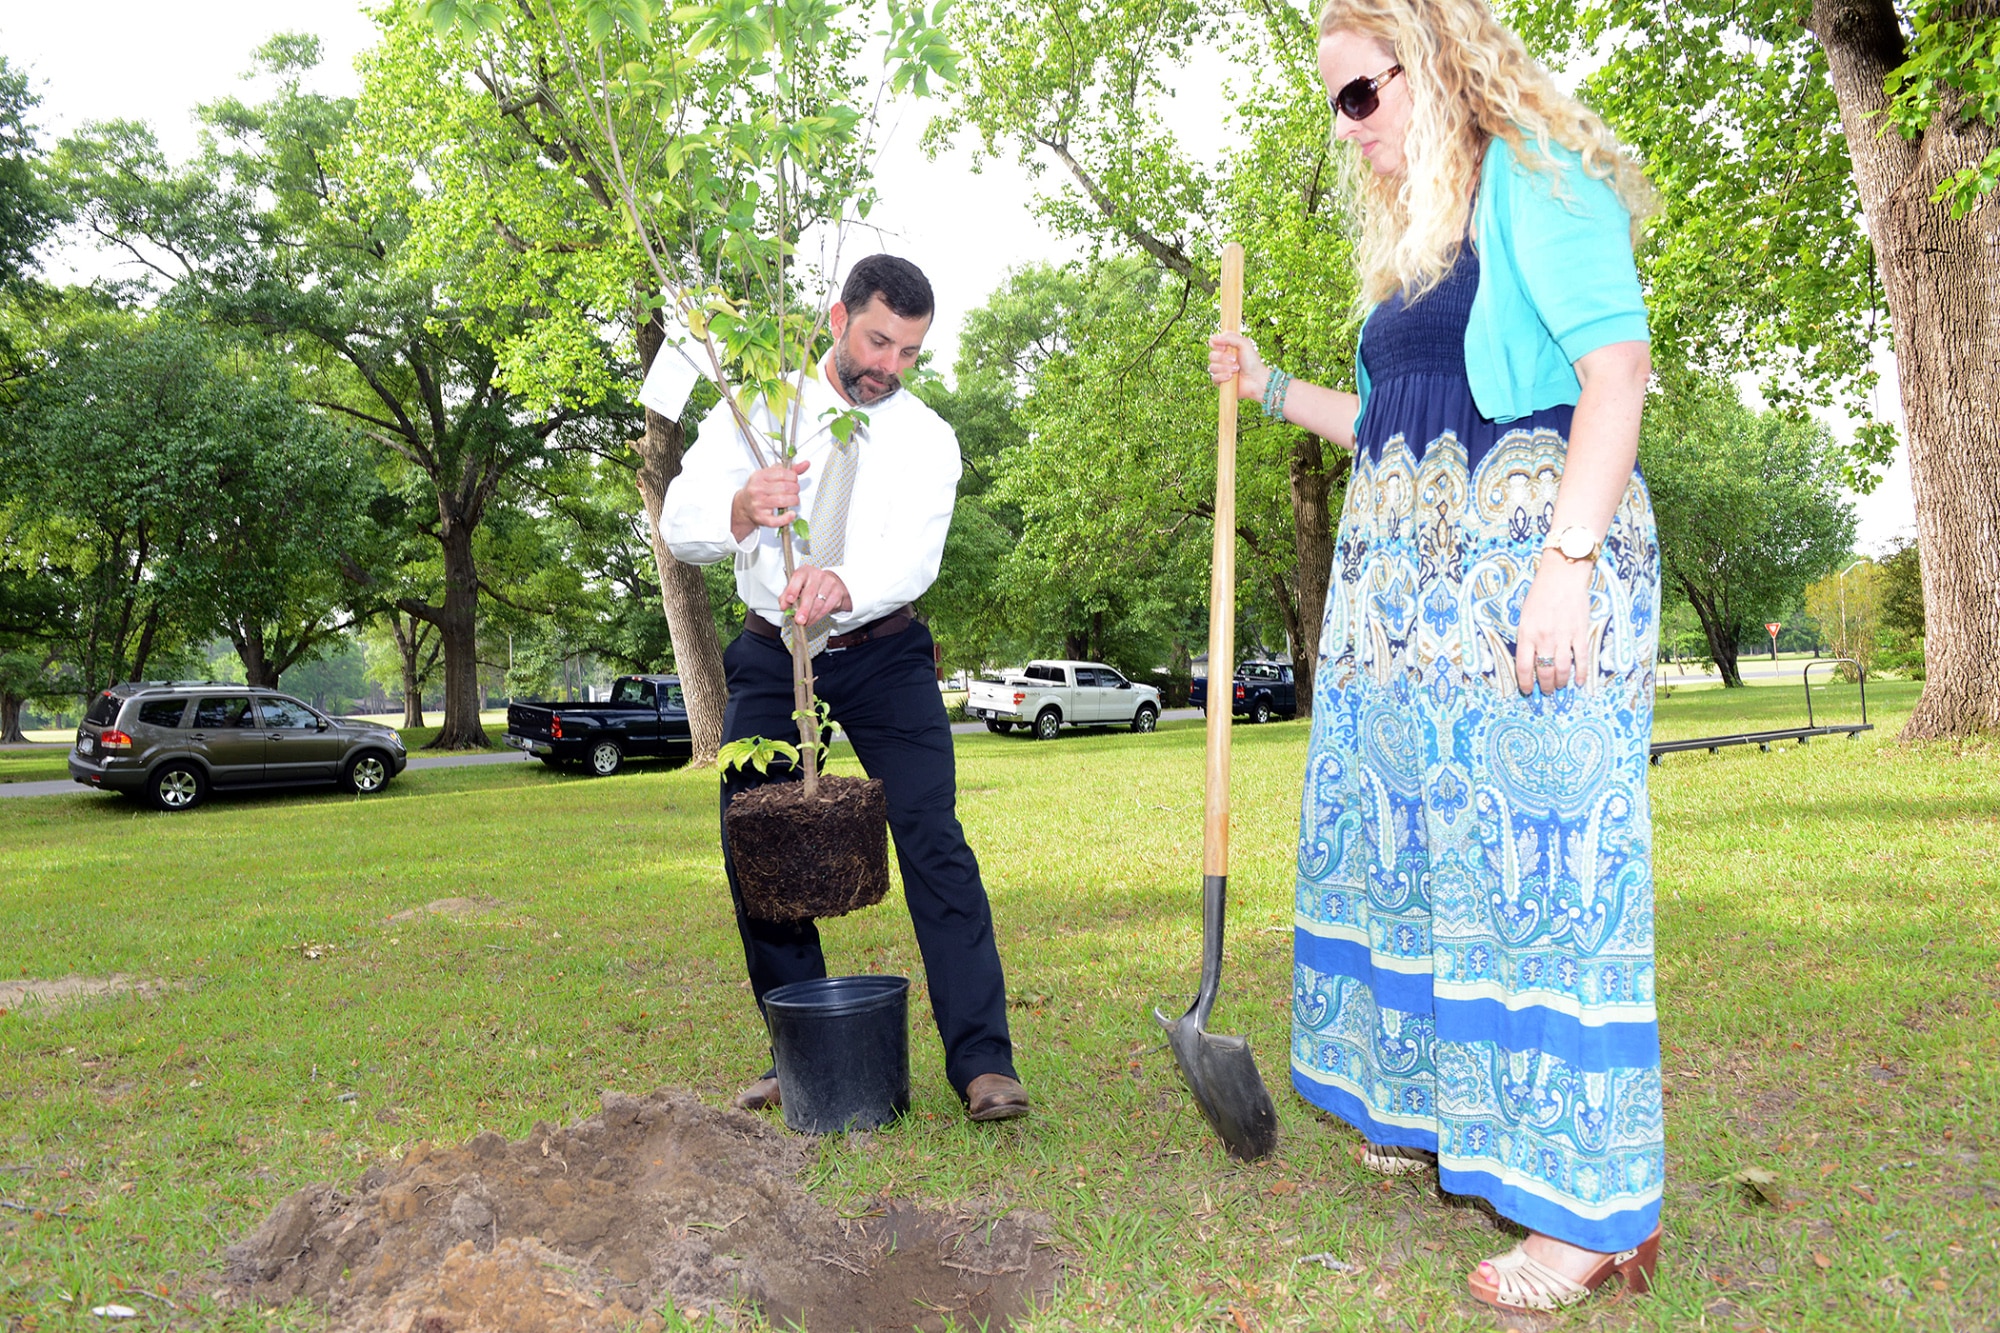 Jacob Tuttle 78th Civil Engineering Group natural and cultural resources program manager, helps Krista Mott, 78th Civil Engineering Group Geographic Information System specialist, plant the Flowering Dogwood dedicated in her honor Wednesday during the Arbor Day Ceremony. (U.S. Air Force photo by Tommie Horton)
